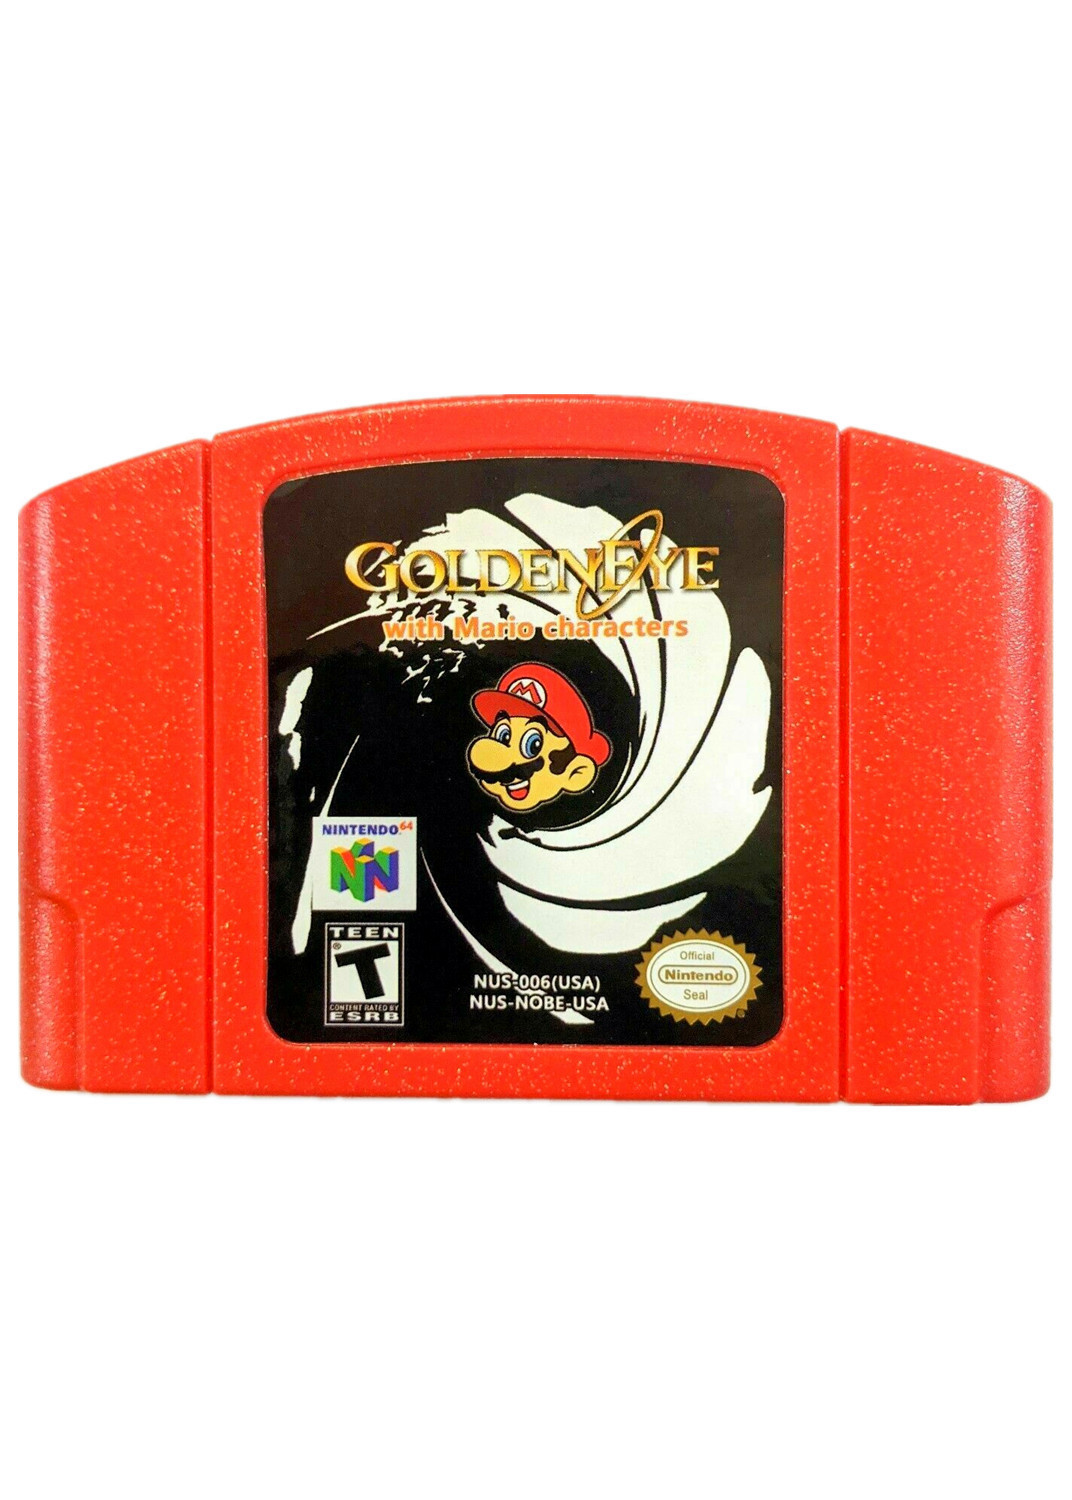 GoldenEye with Mario Characters Game Cartridge For Nintendo 64 N64 USA Version